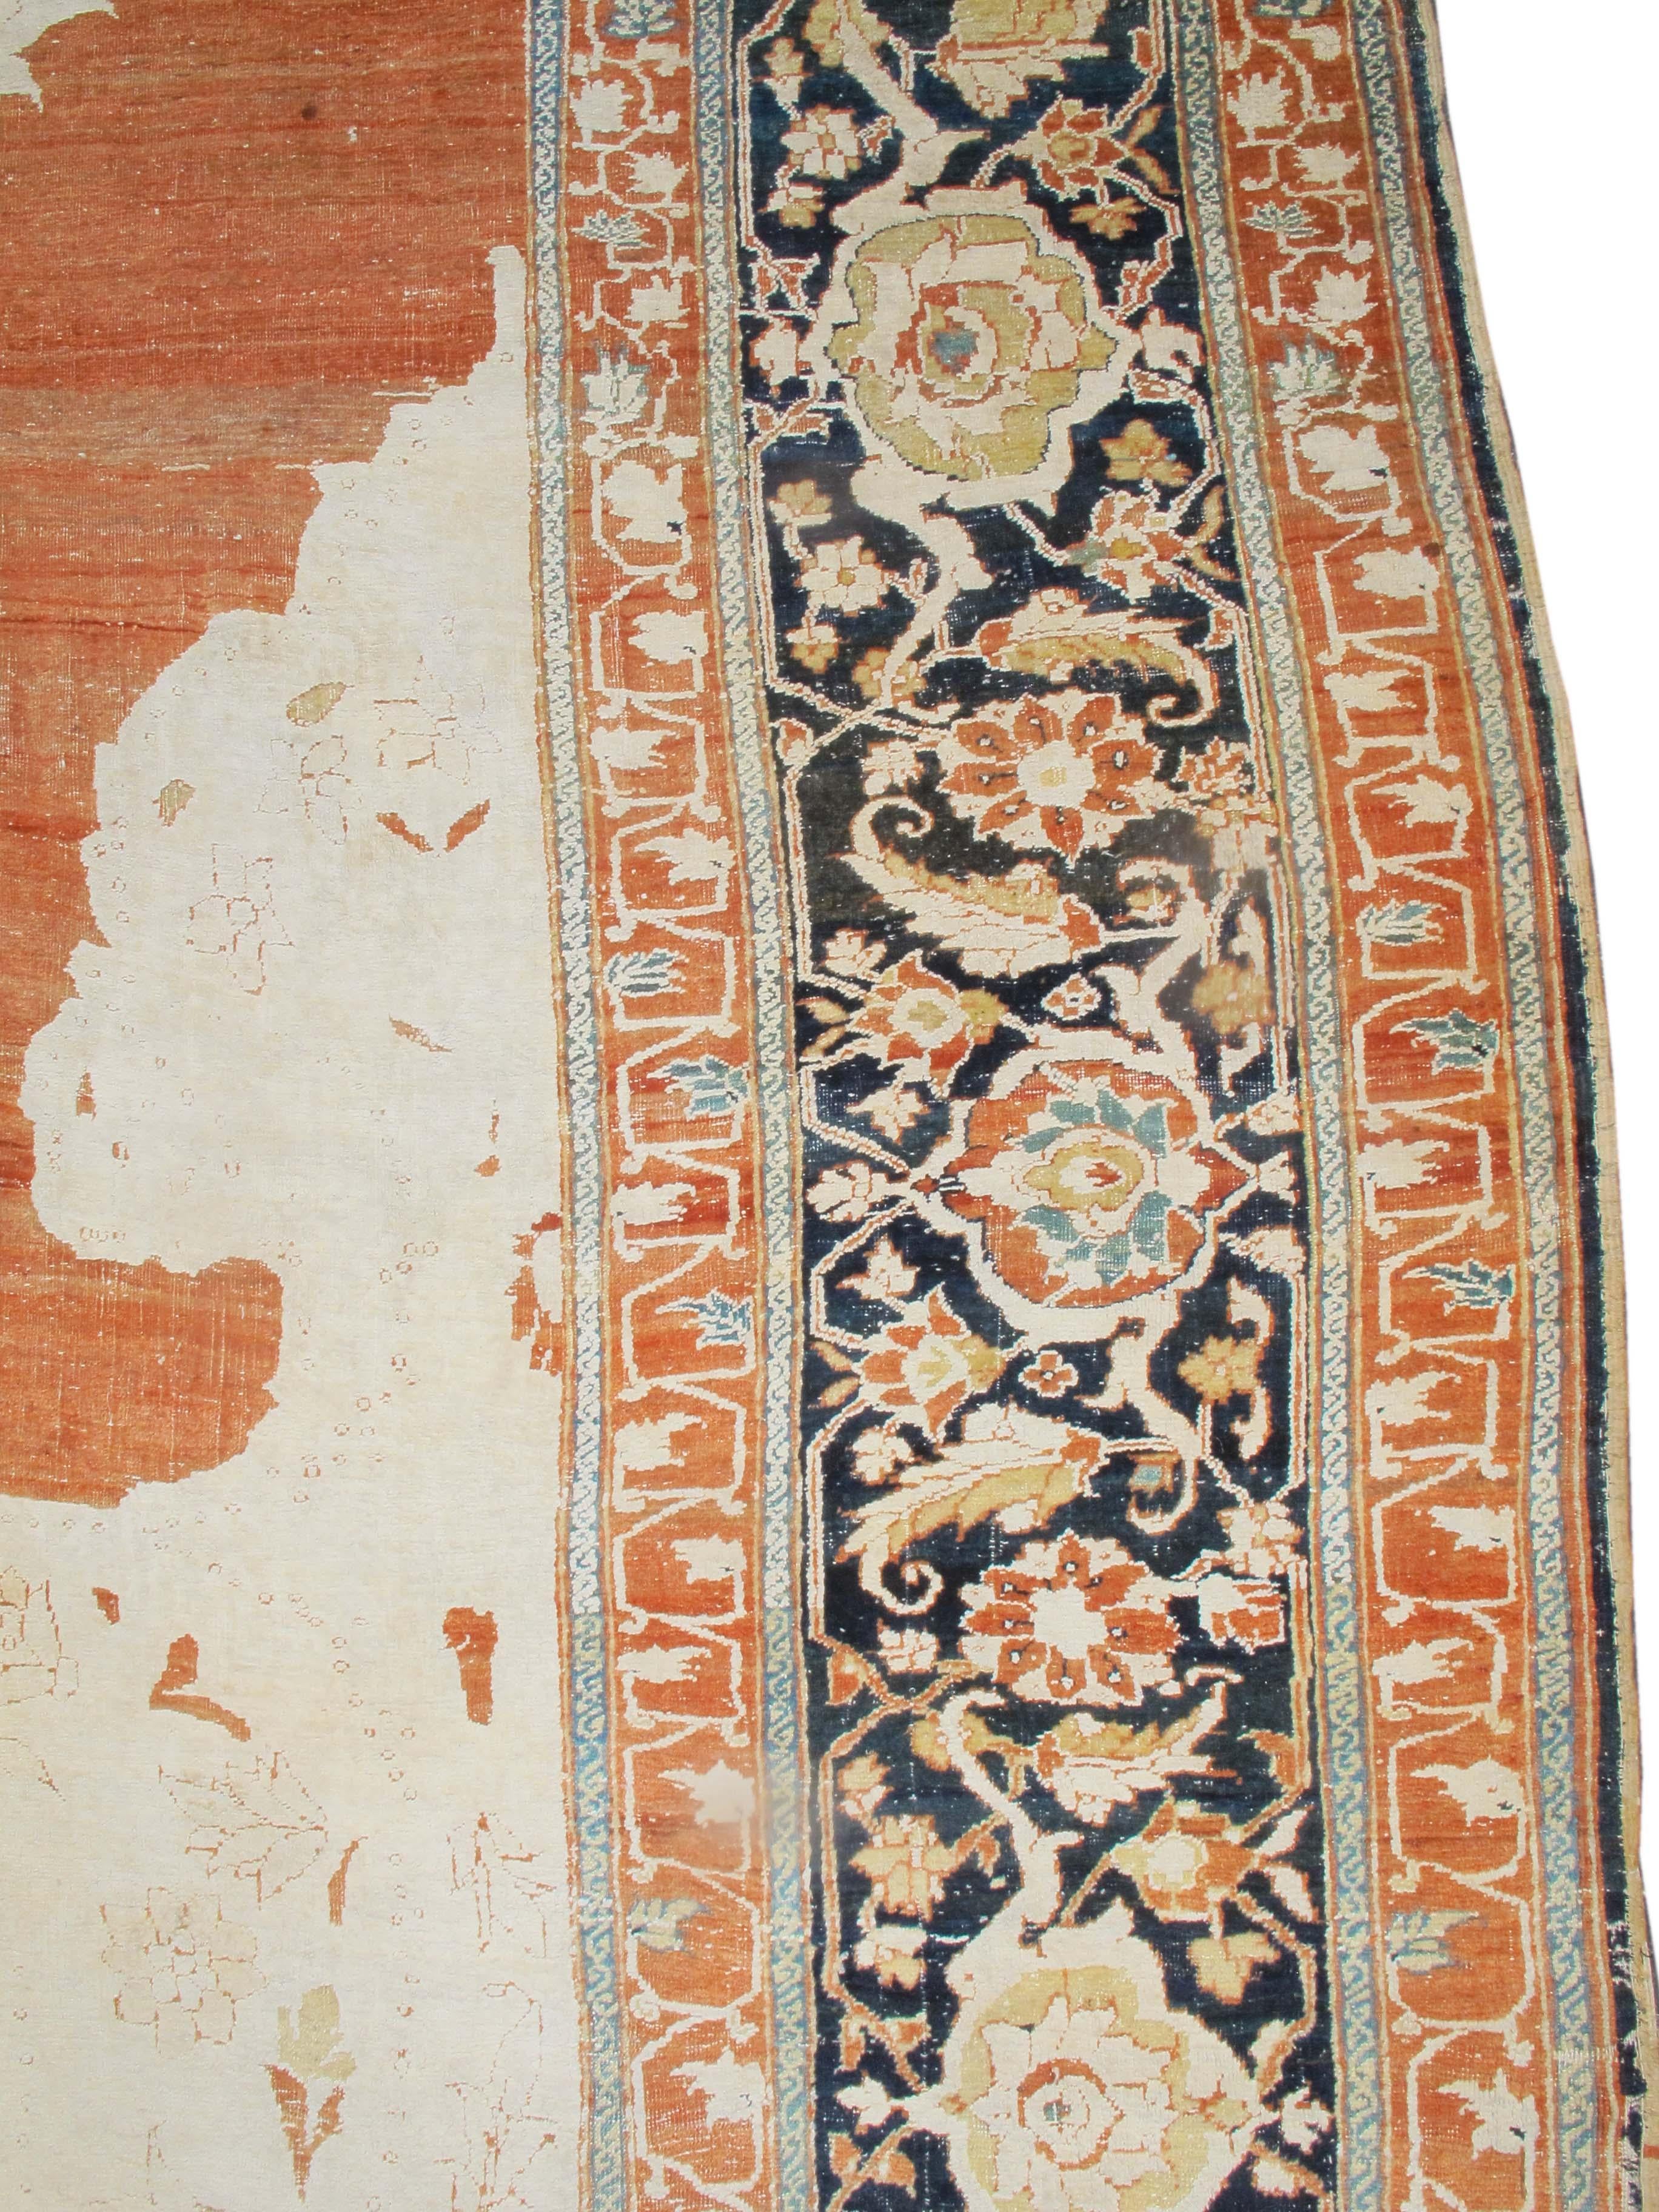 Hand-Woven Large Antique Persian Tabriz Carpet, Mid-19th Century For Sale